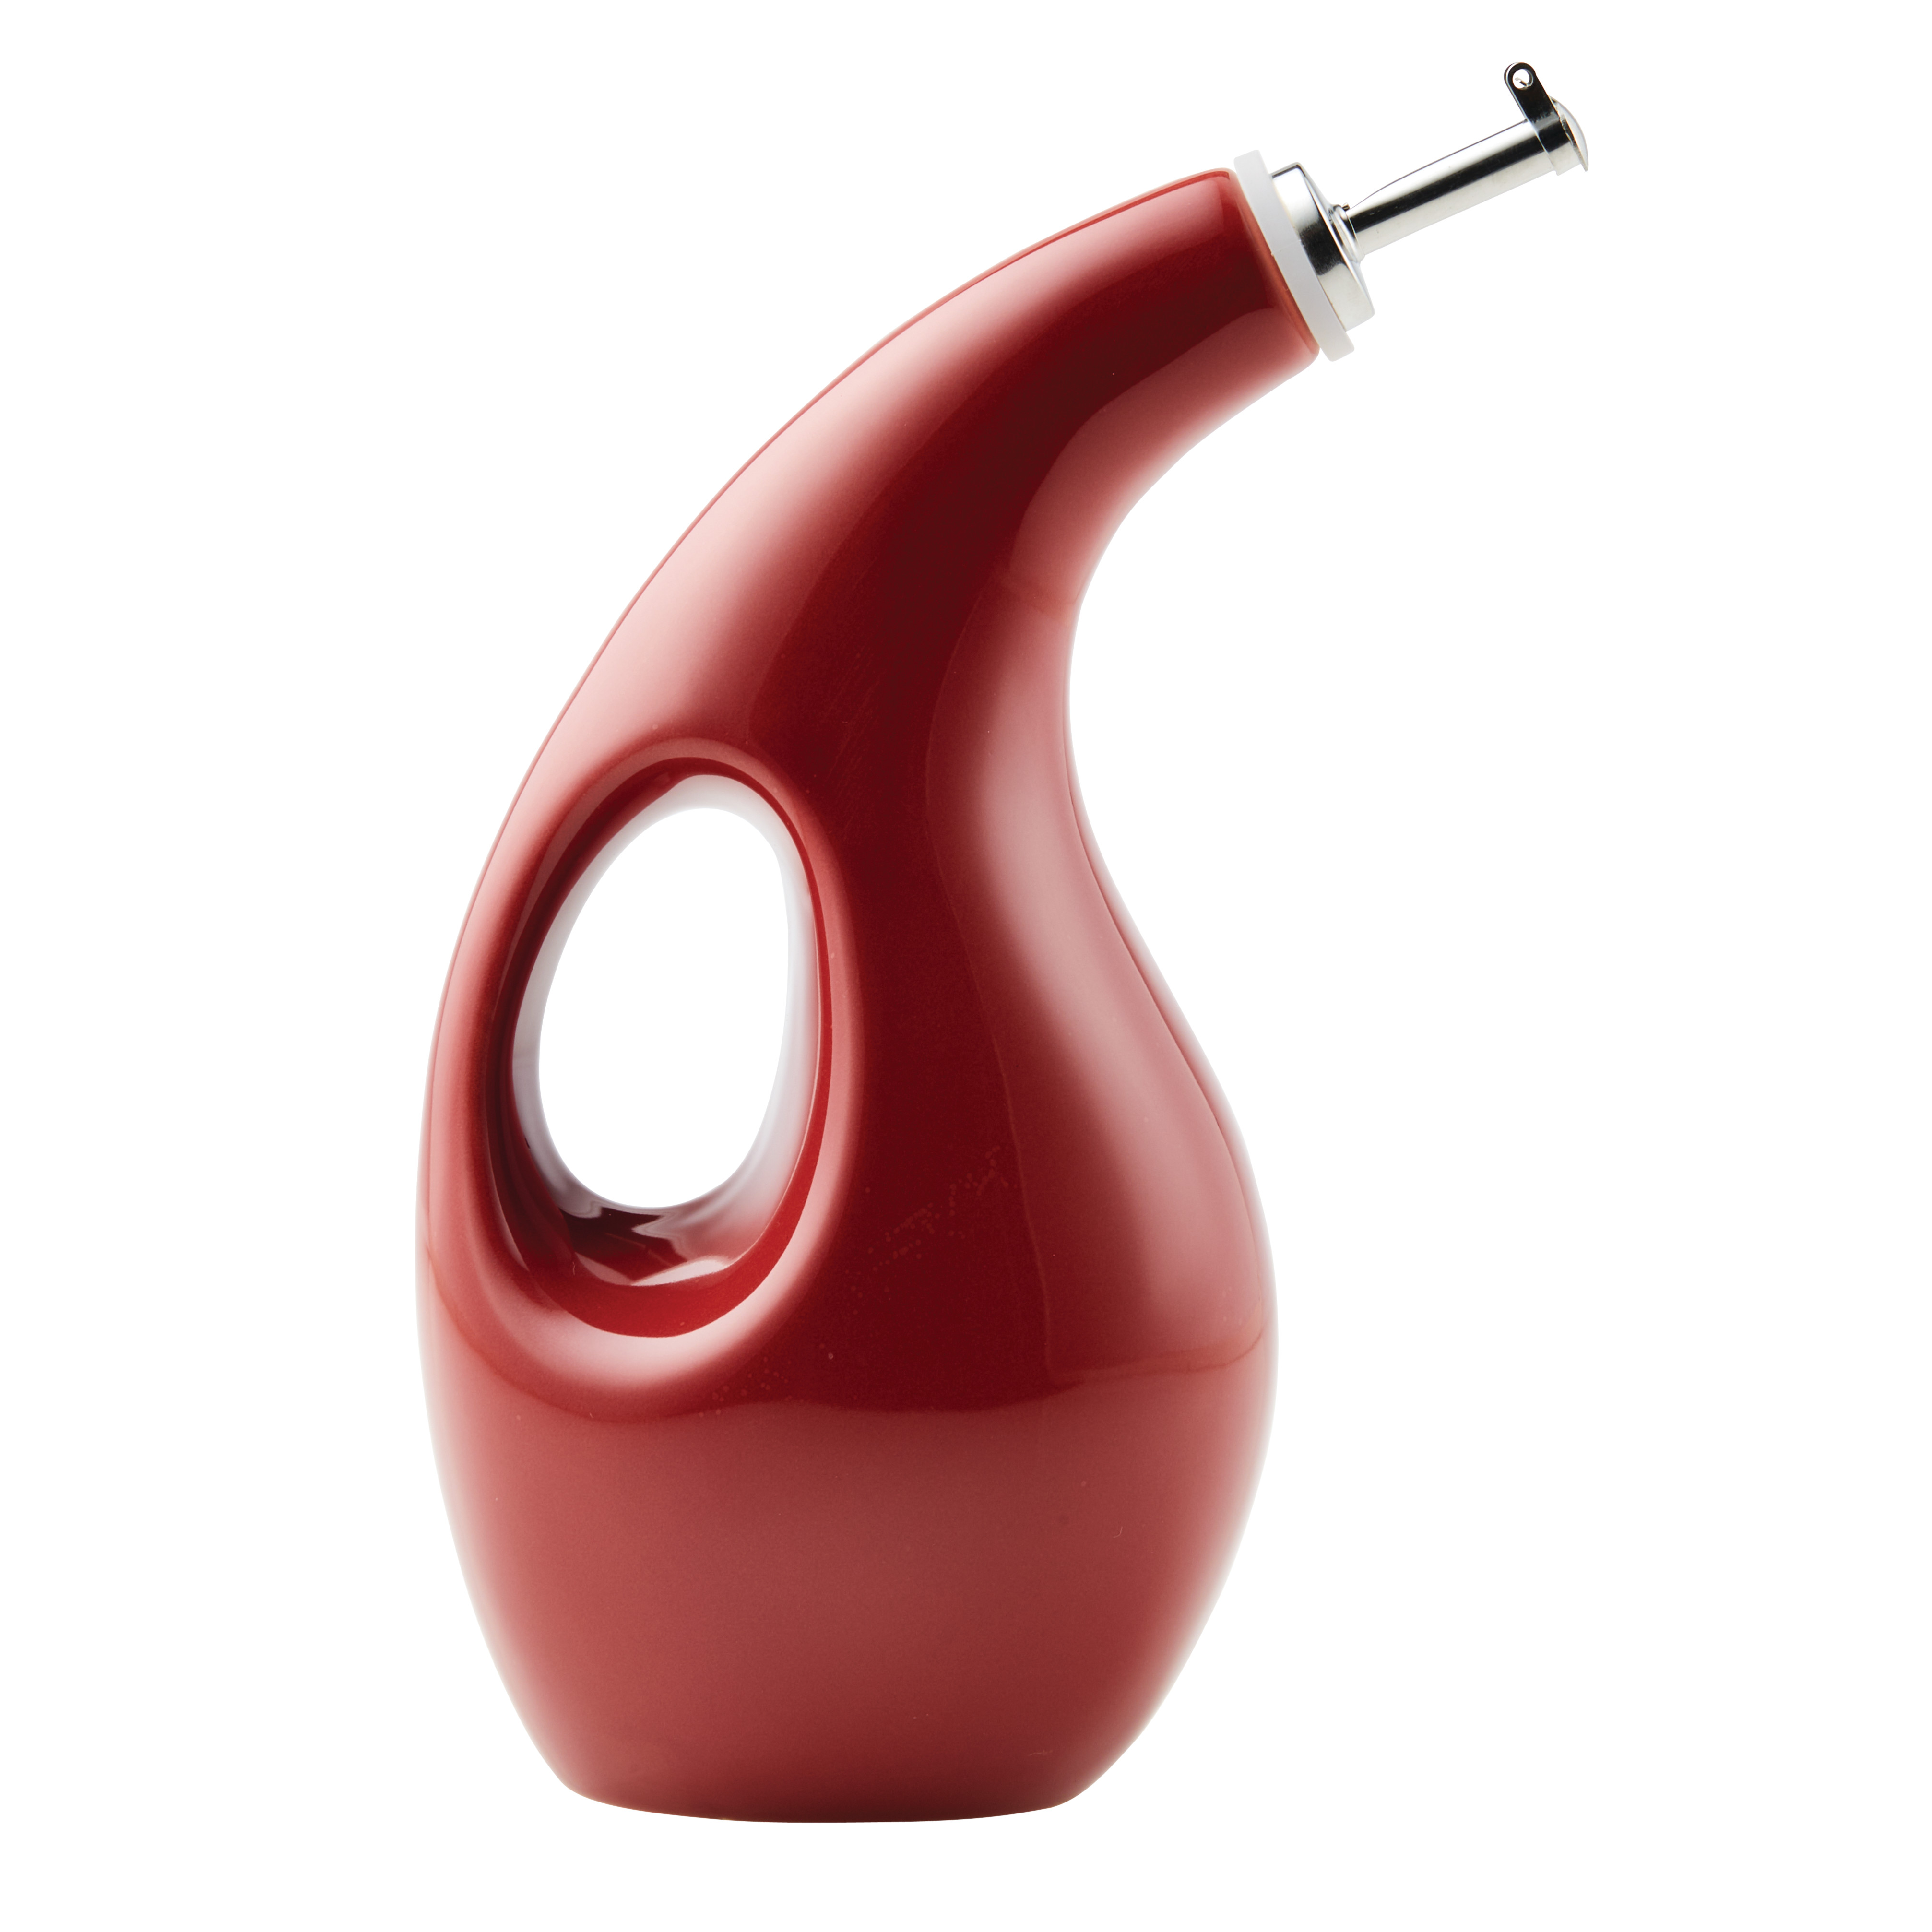 Rachael Ray Ceramic EVOO Oil and Vinegar Dispensing Bottle, 24-Ounce, Cranberry Red - image 1 of 7